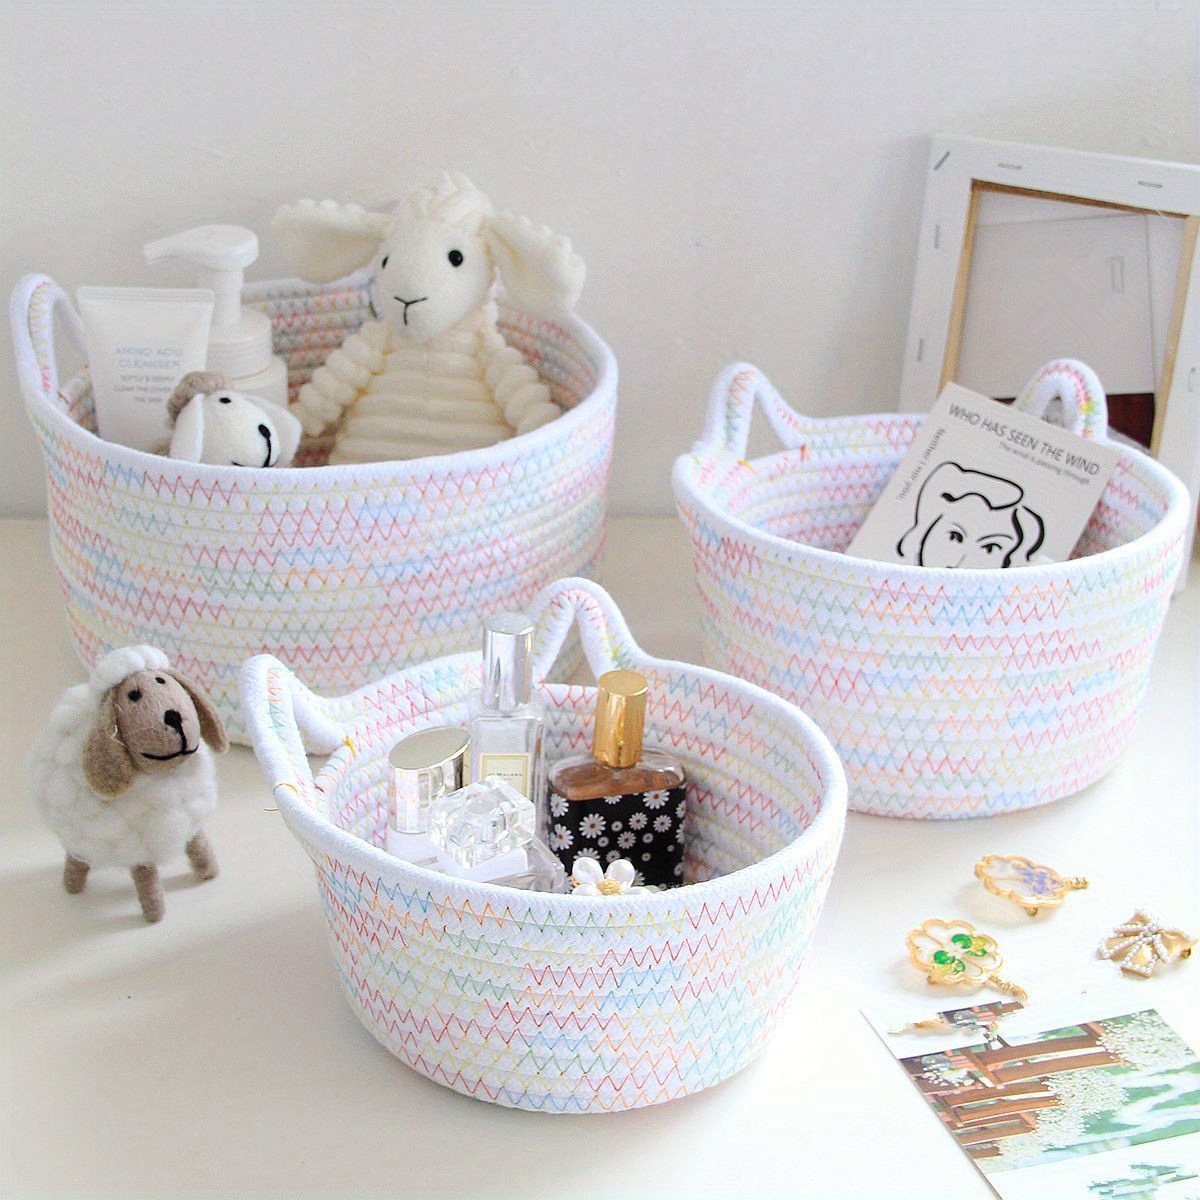 Small Storage Baskets Baskets for Organizing, Baskets for Gifts